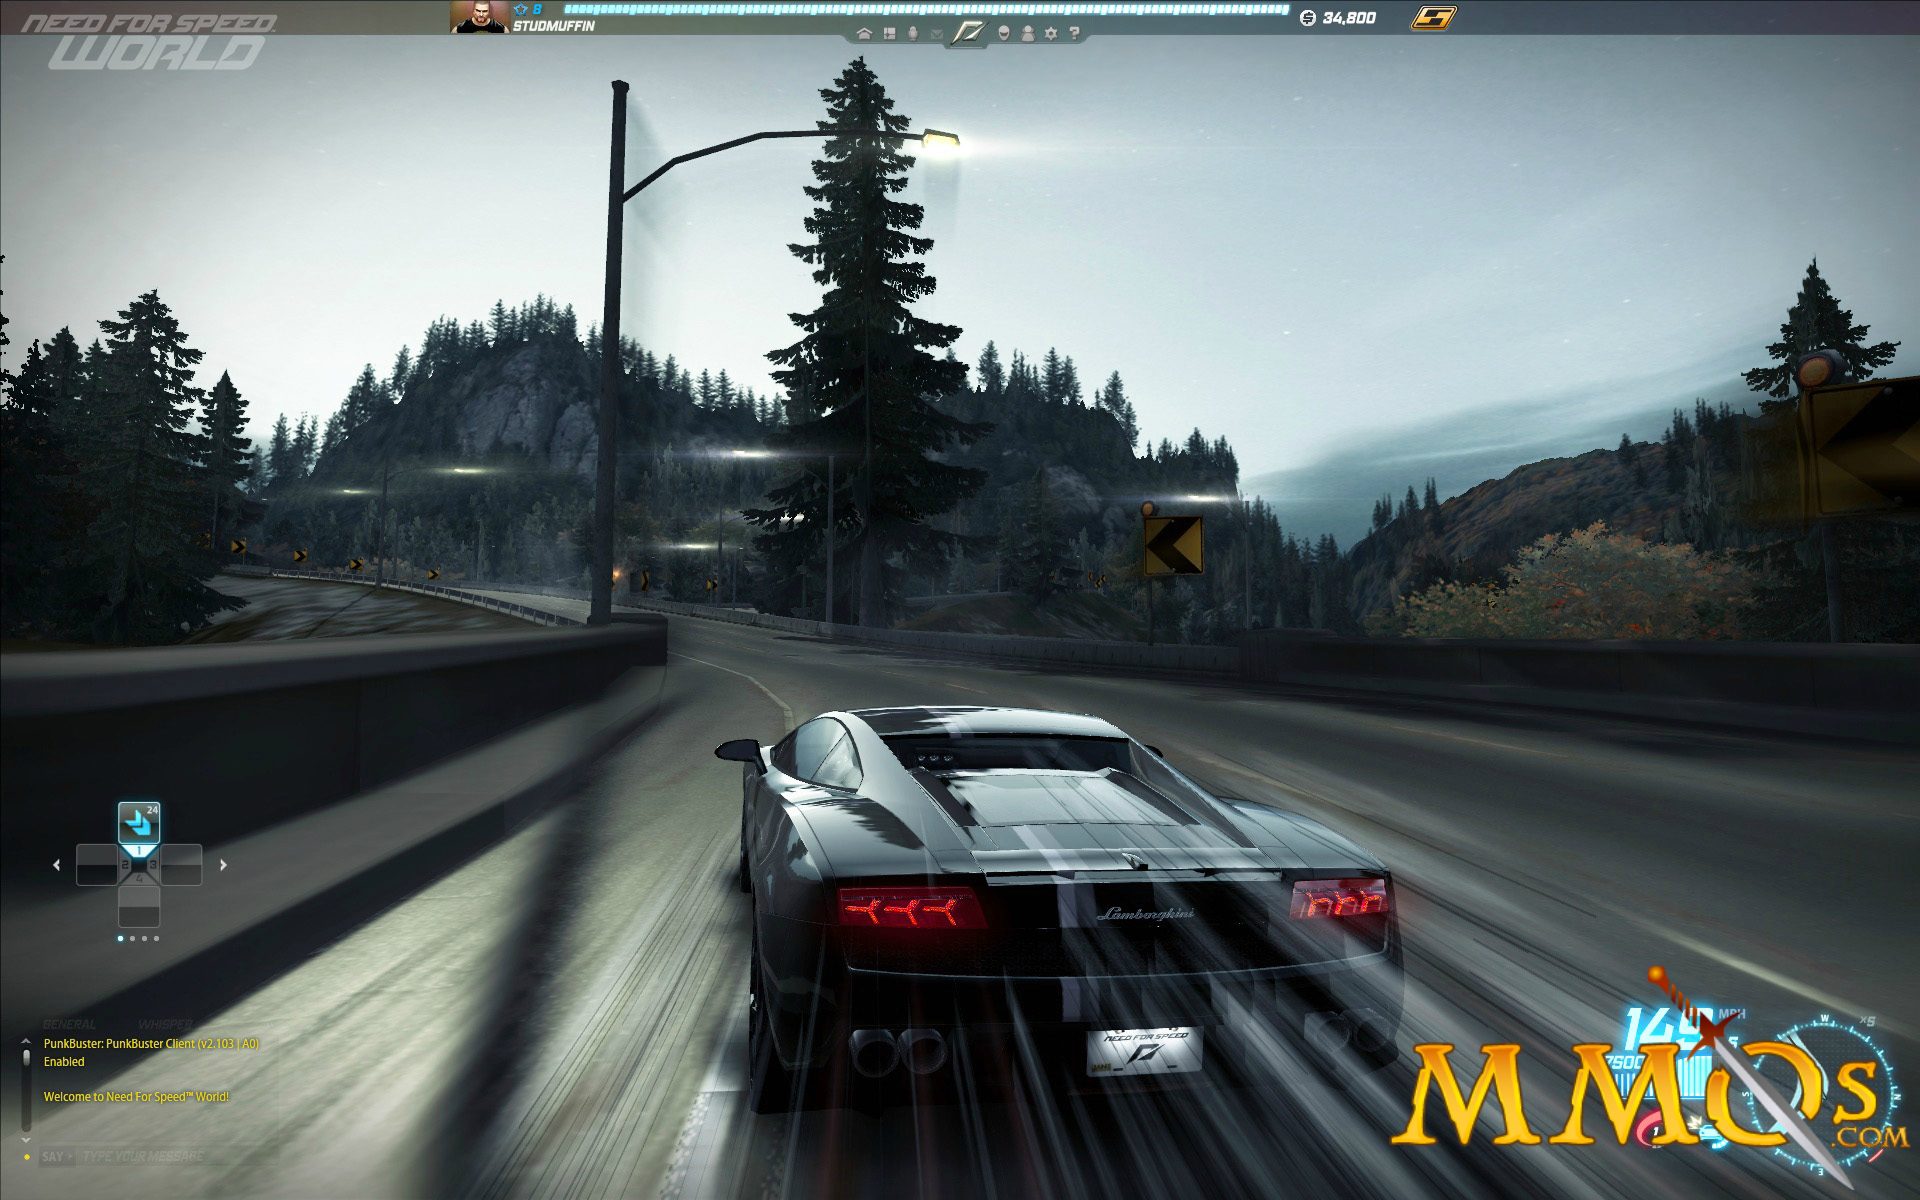 Need for Speed World - Play Game for Free - GameTop